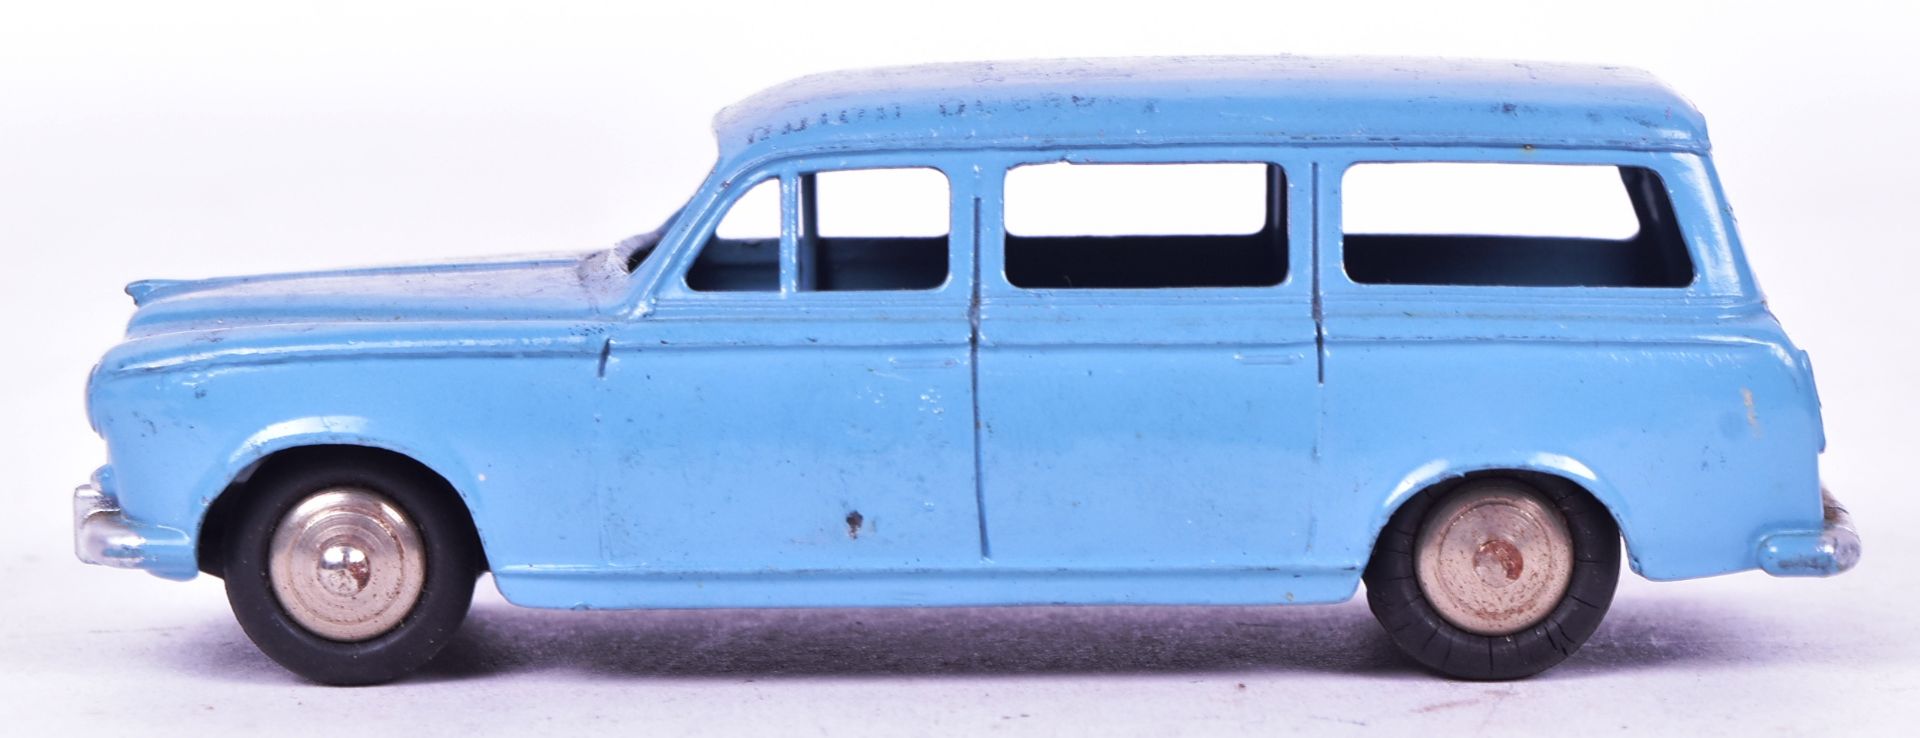 DIECAST - FRENCH DINKY TOYS - 403 PEUGEOT U5 - Image 2 of 5